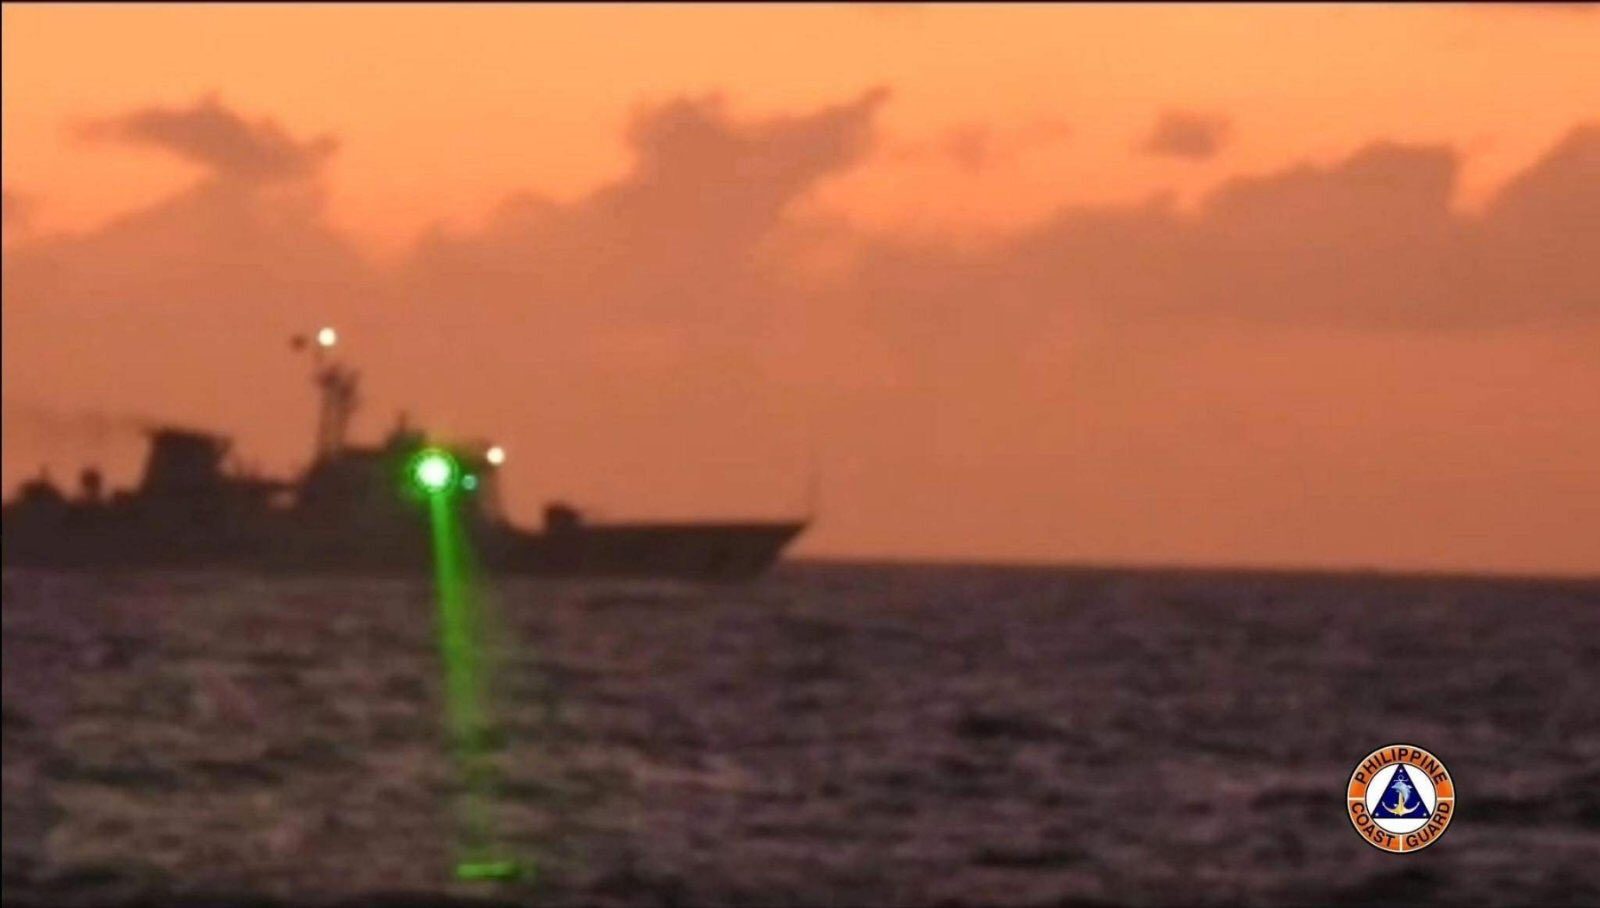 West PH Sea laser incident makes first test case for new PH-China communication line